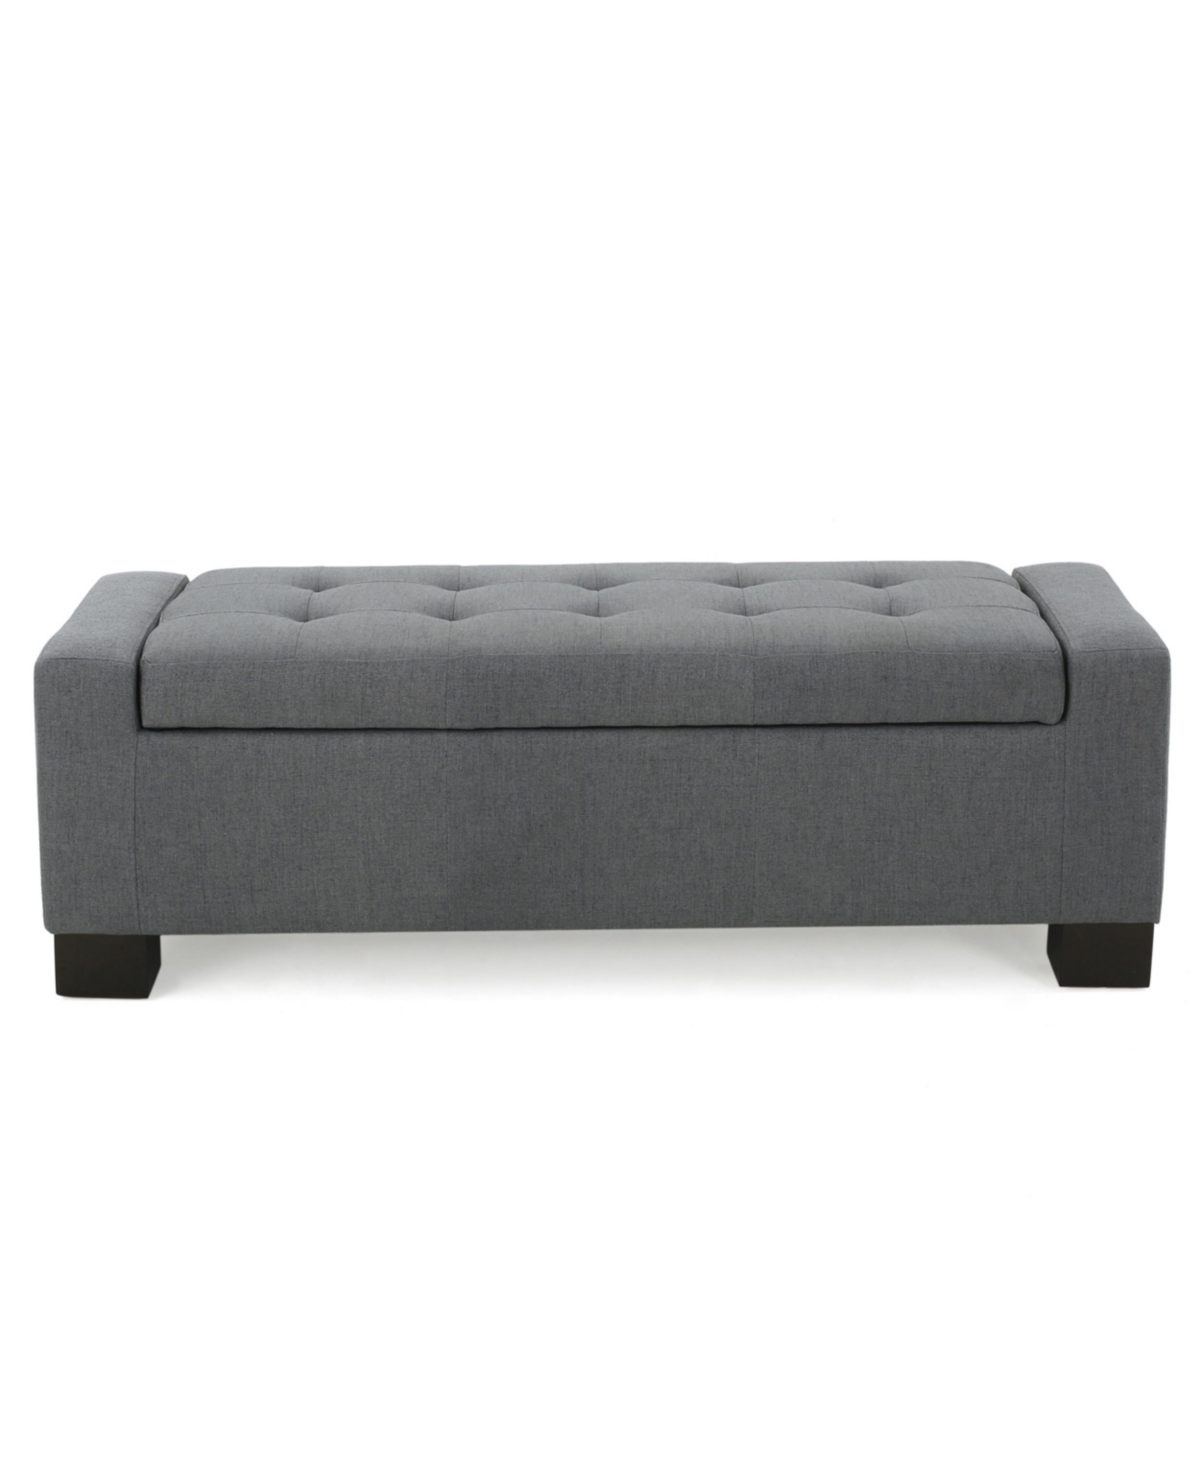 Noble House Guernsey Storage Ottoman In Charcoal